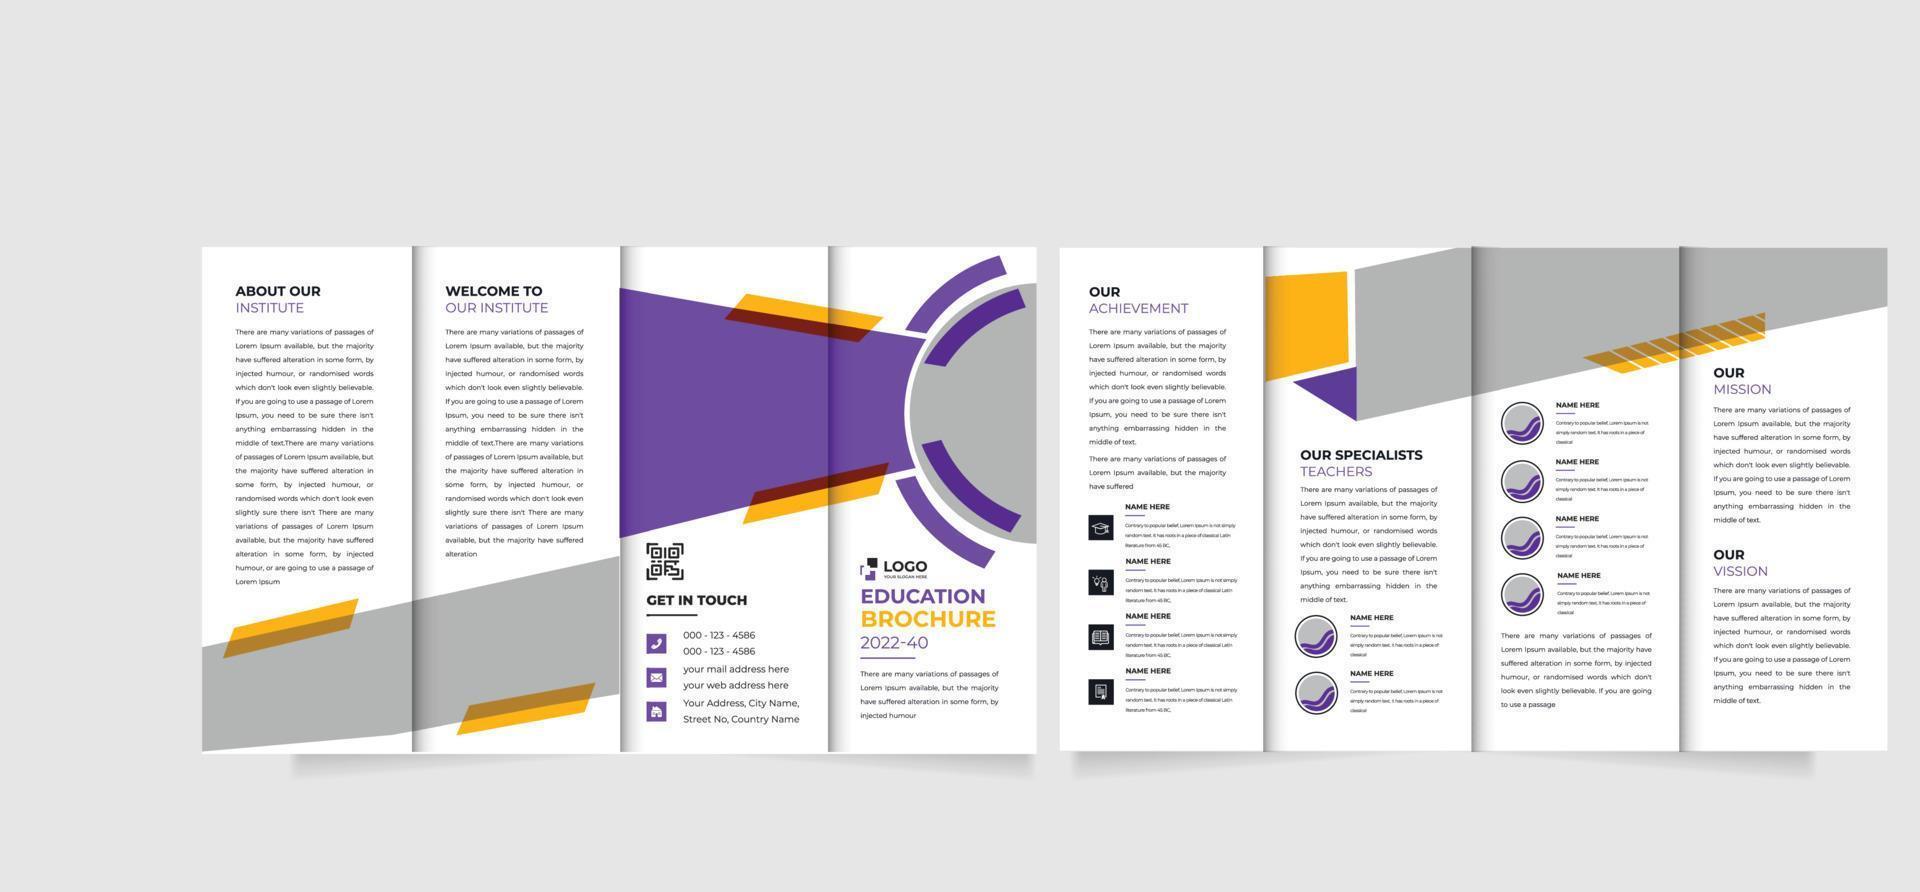 School admission square Fourfold brochure template. Kids back to school education admission Fourfold brochure vector